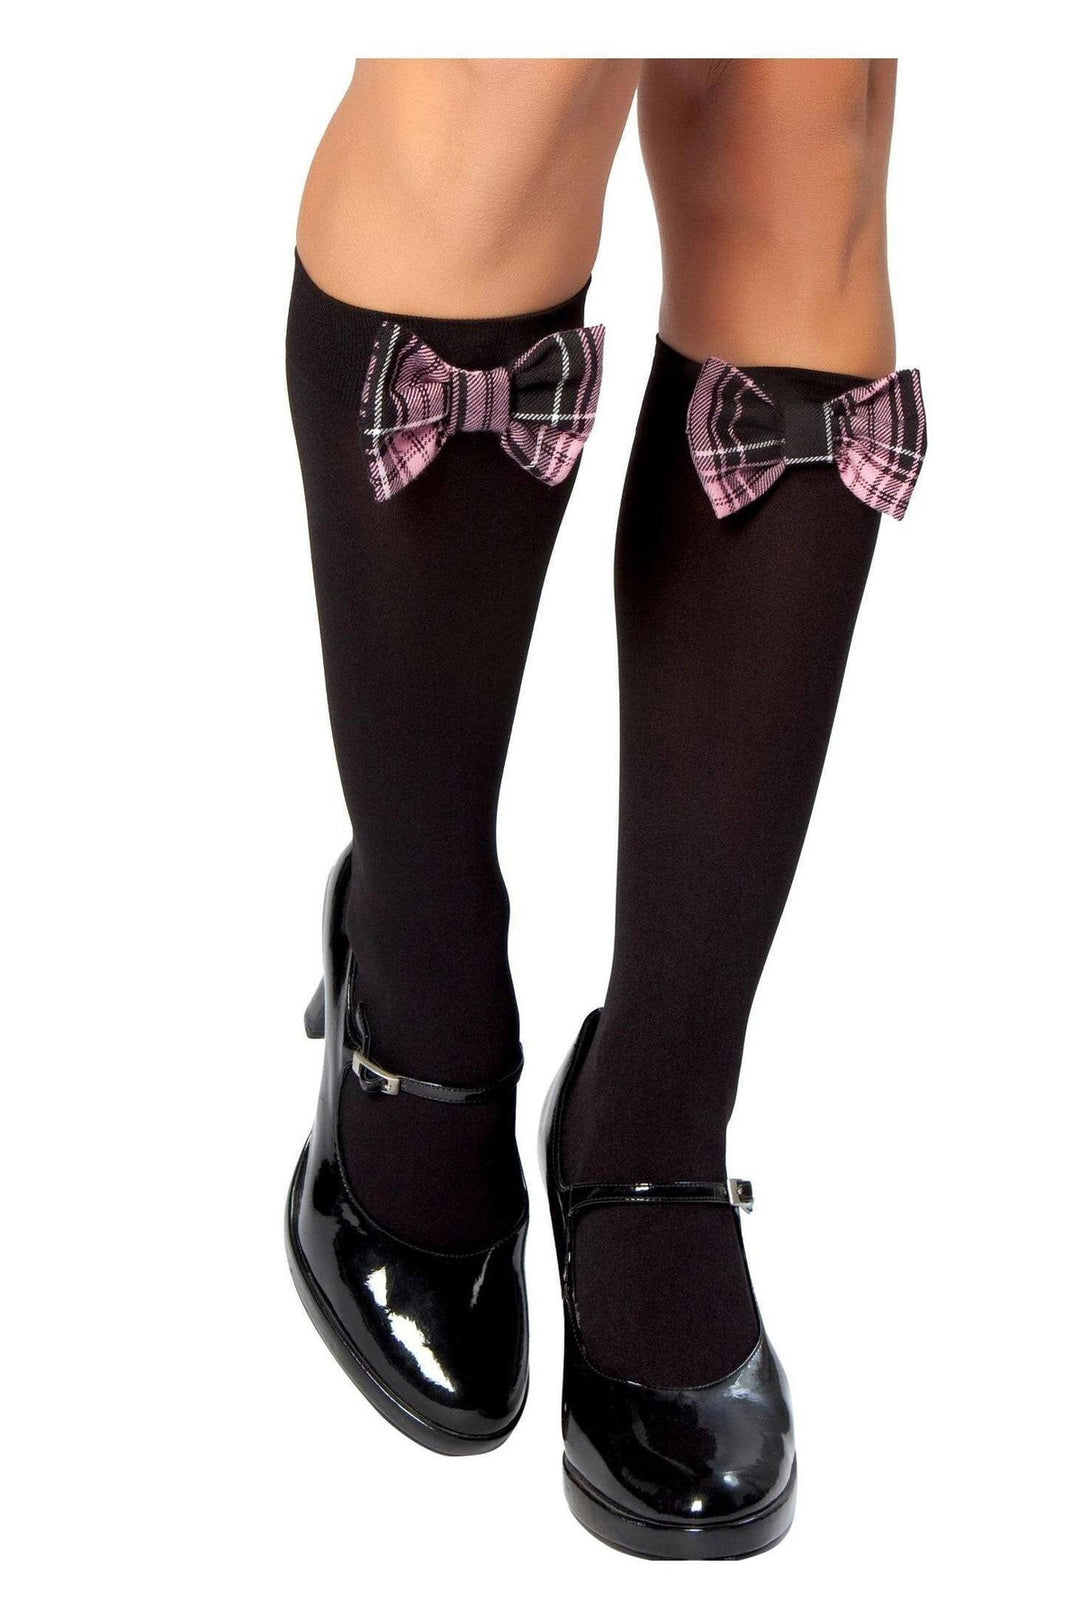 Roma Stockings with Black/Baby Pink Bow-SEXYSHOES.COM